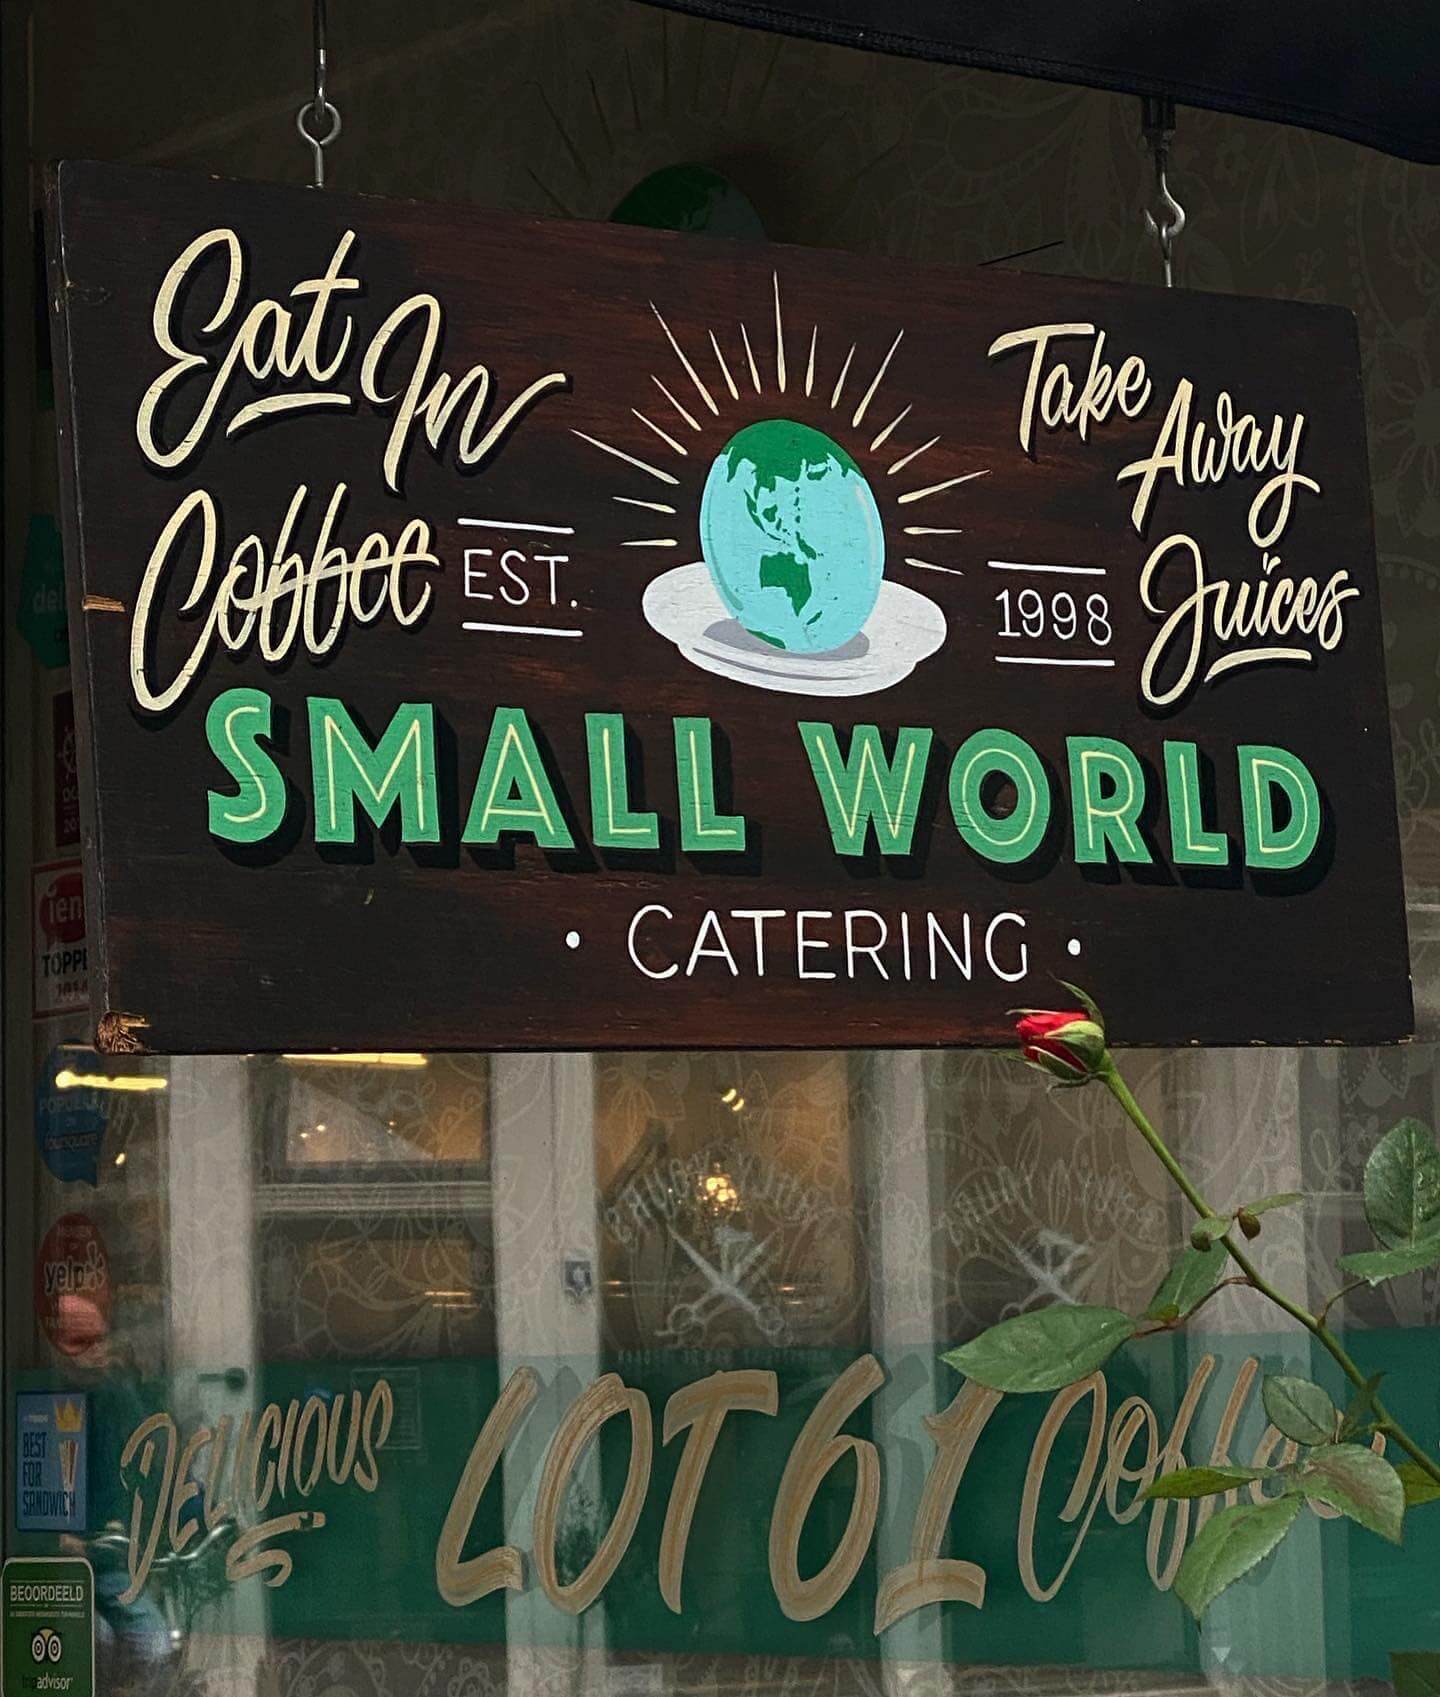 Small World Catering